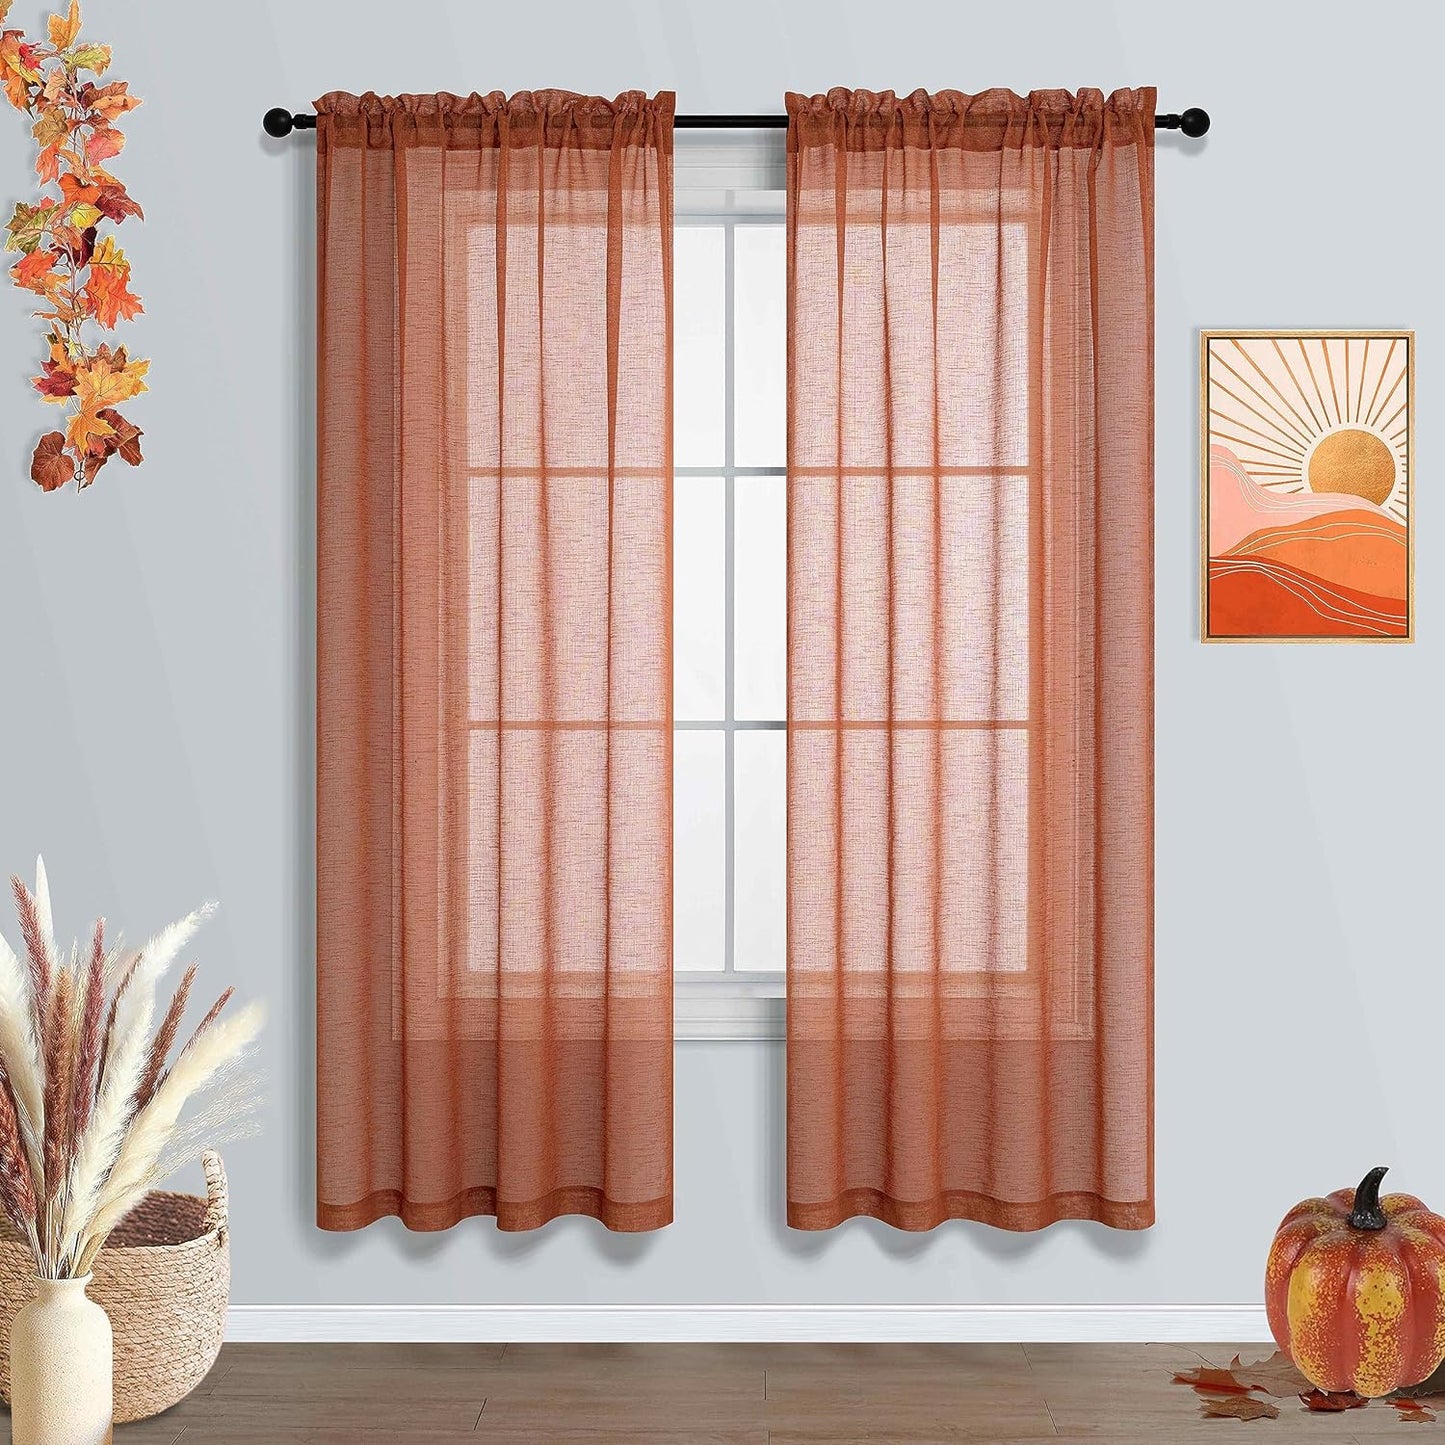 Burnt Orange Sheer Curtains 84 Inch Length for Bedroom 2 Panels Pumpkin Thanksgiving Day Rod Pocket Bohemian Semi Sheer Curtain Rustic Light Filtering Boho Curtains for Living Room 84 Inches Long  MRS.NATURALL TEXTILE Terracotta 42X63 